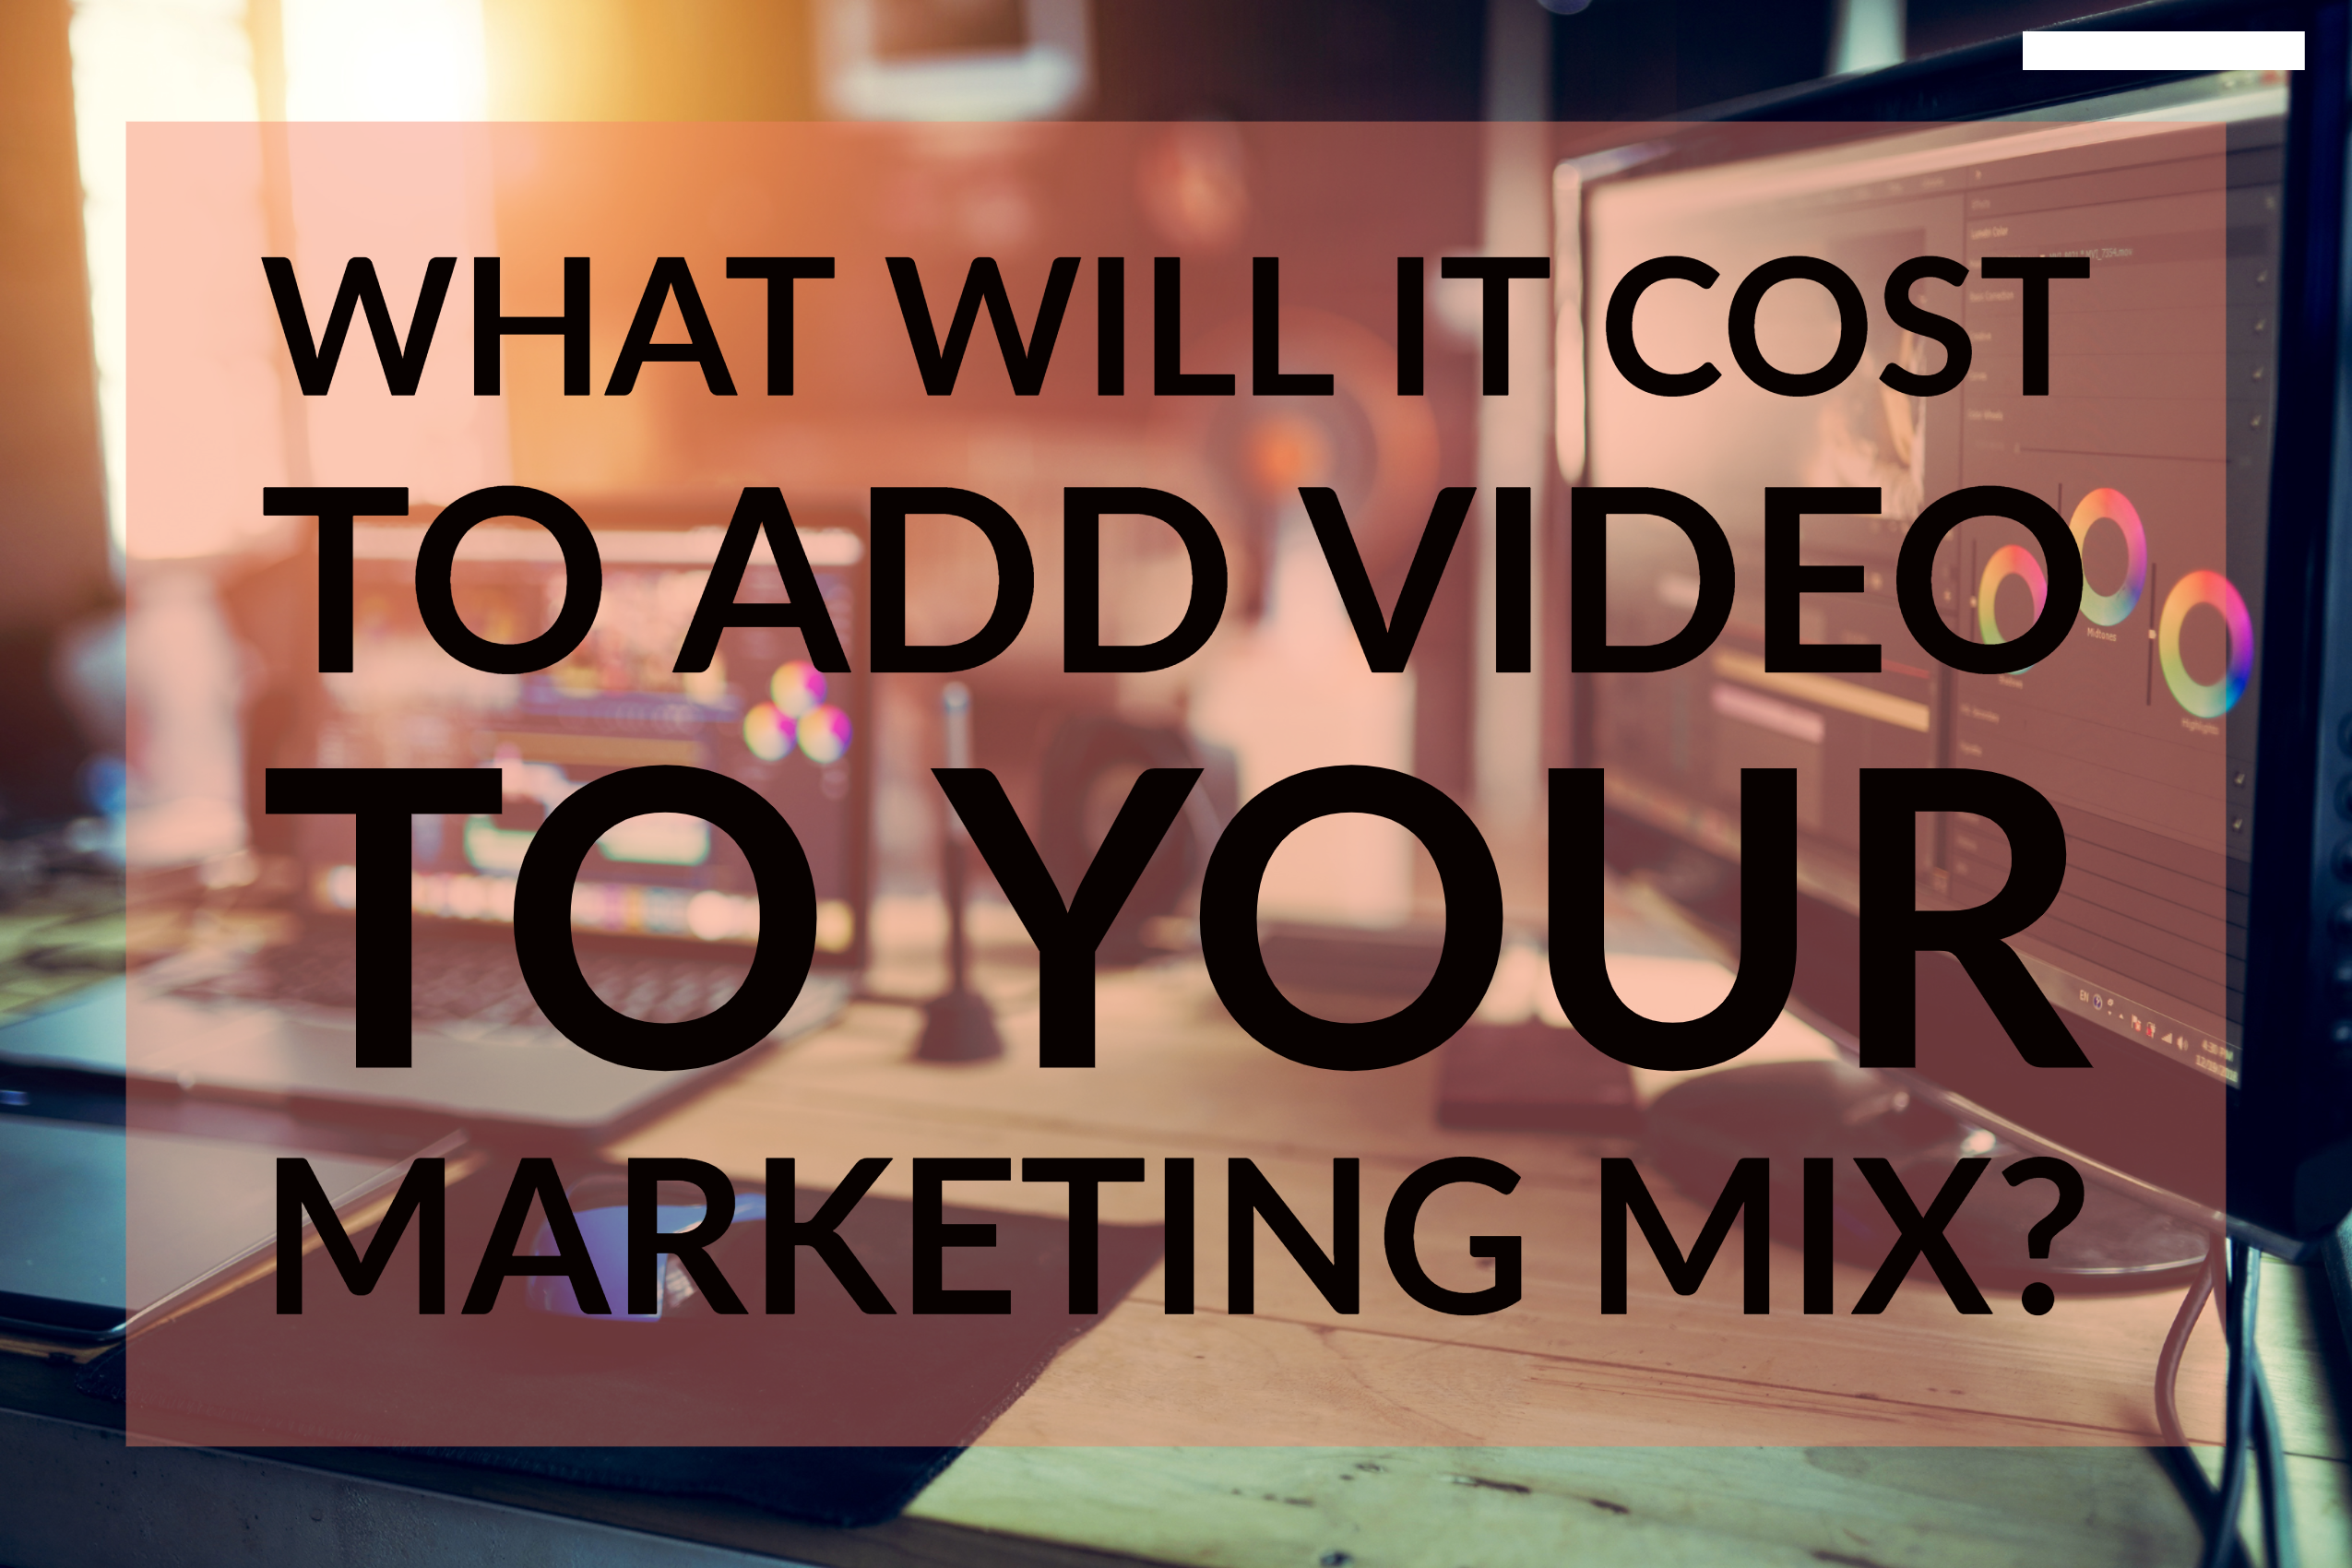 What Will It Cost To Add Video To Your Marketing Mix?